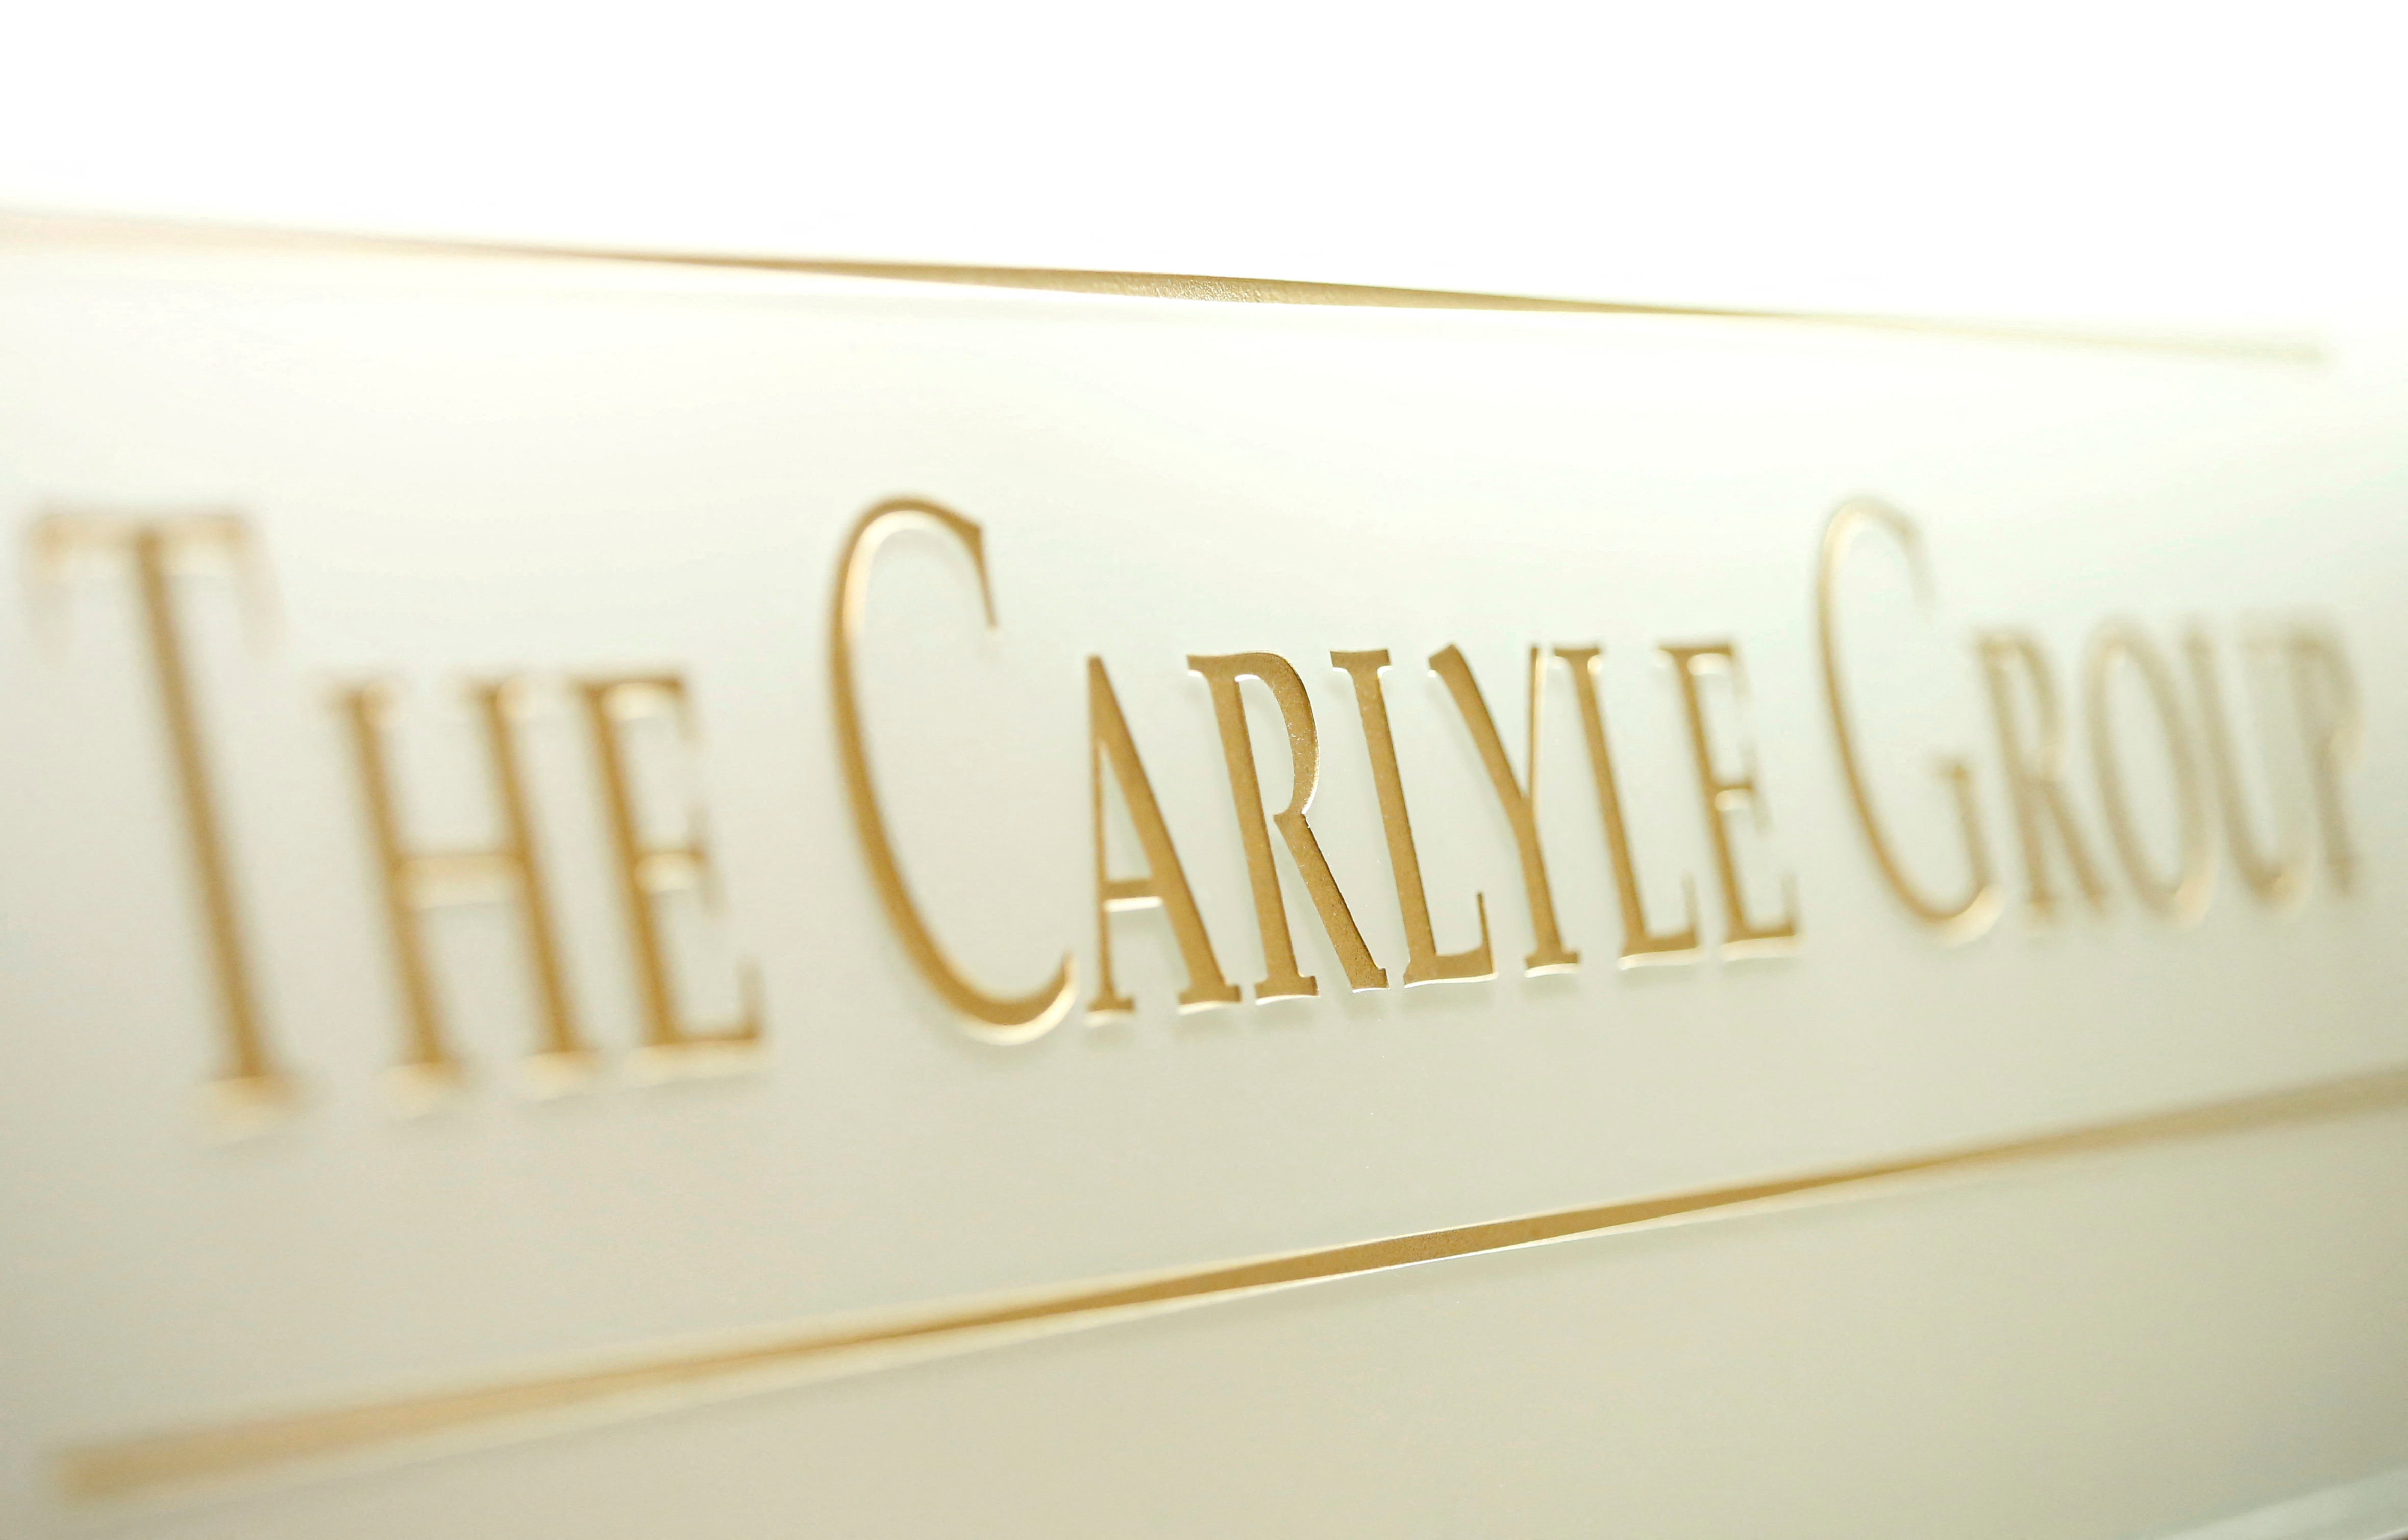 The logo of The Carlyle Group is displayed at the company's office in Tokyo